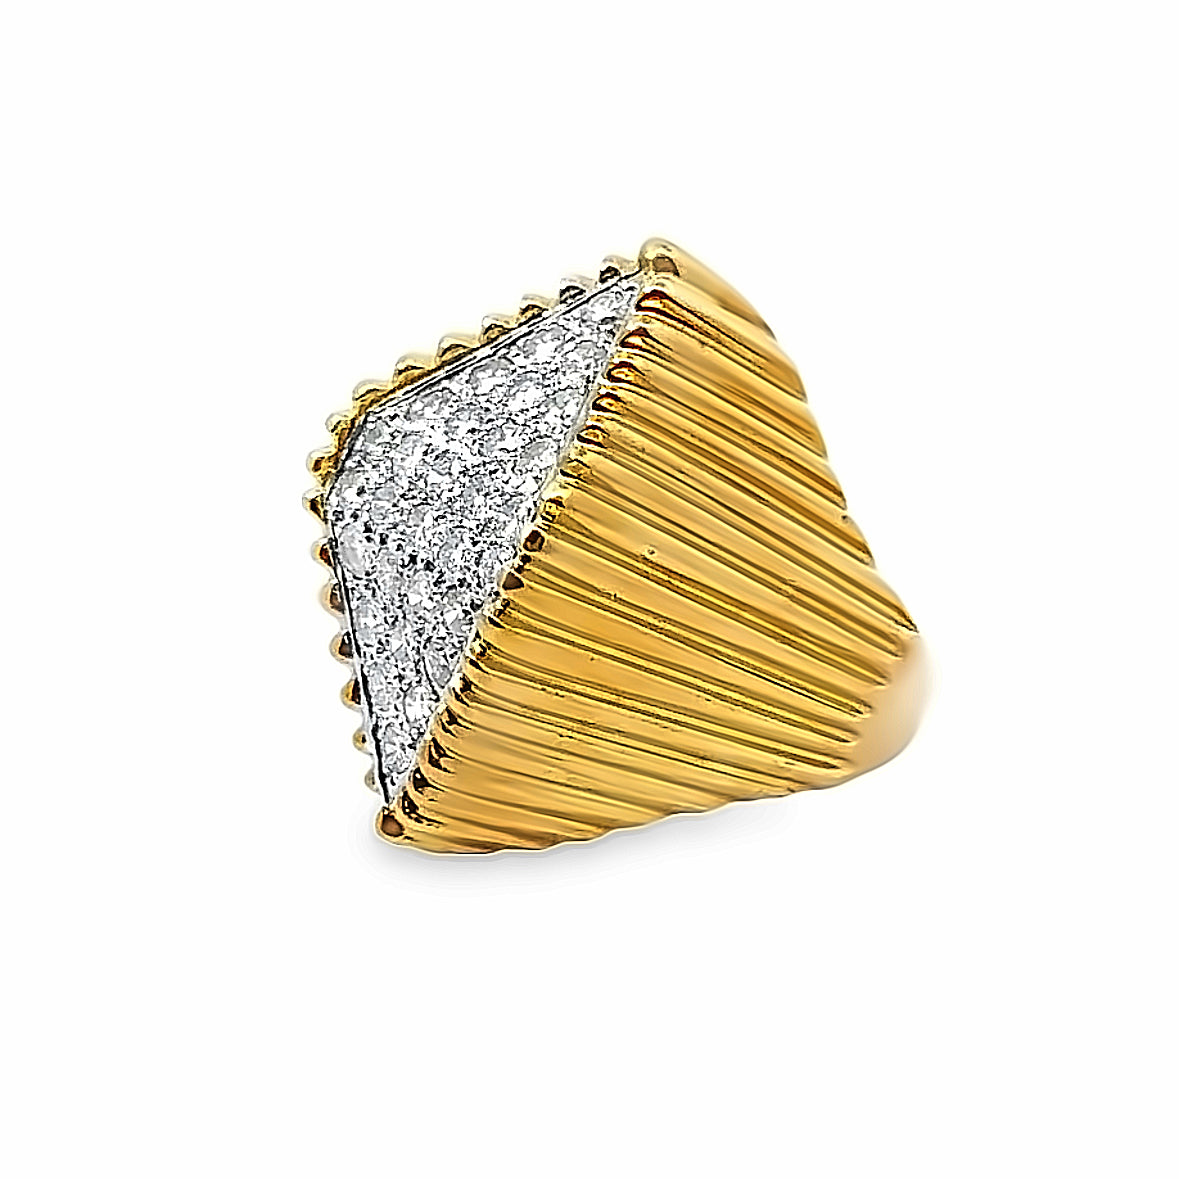 Vintage 14K Yellow & White Gold with Pave Set Diamonds Cocktail Ring with Scalloped Sides